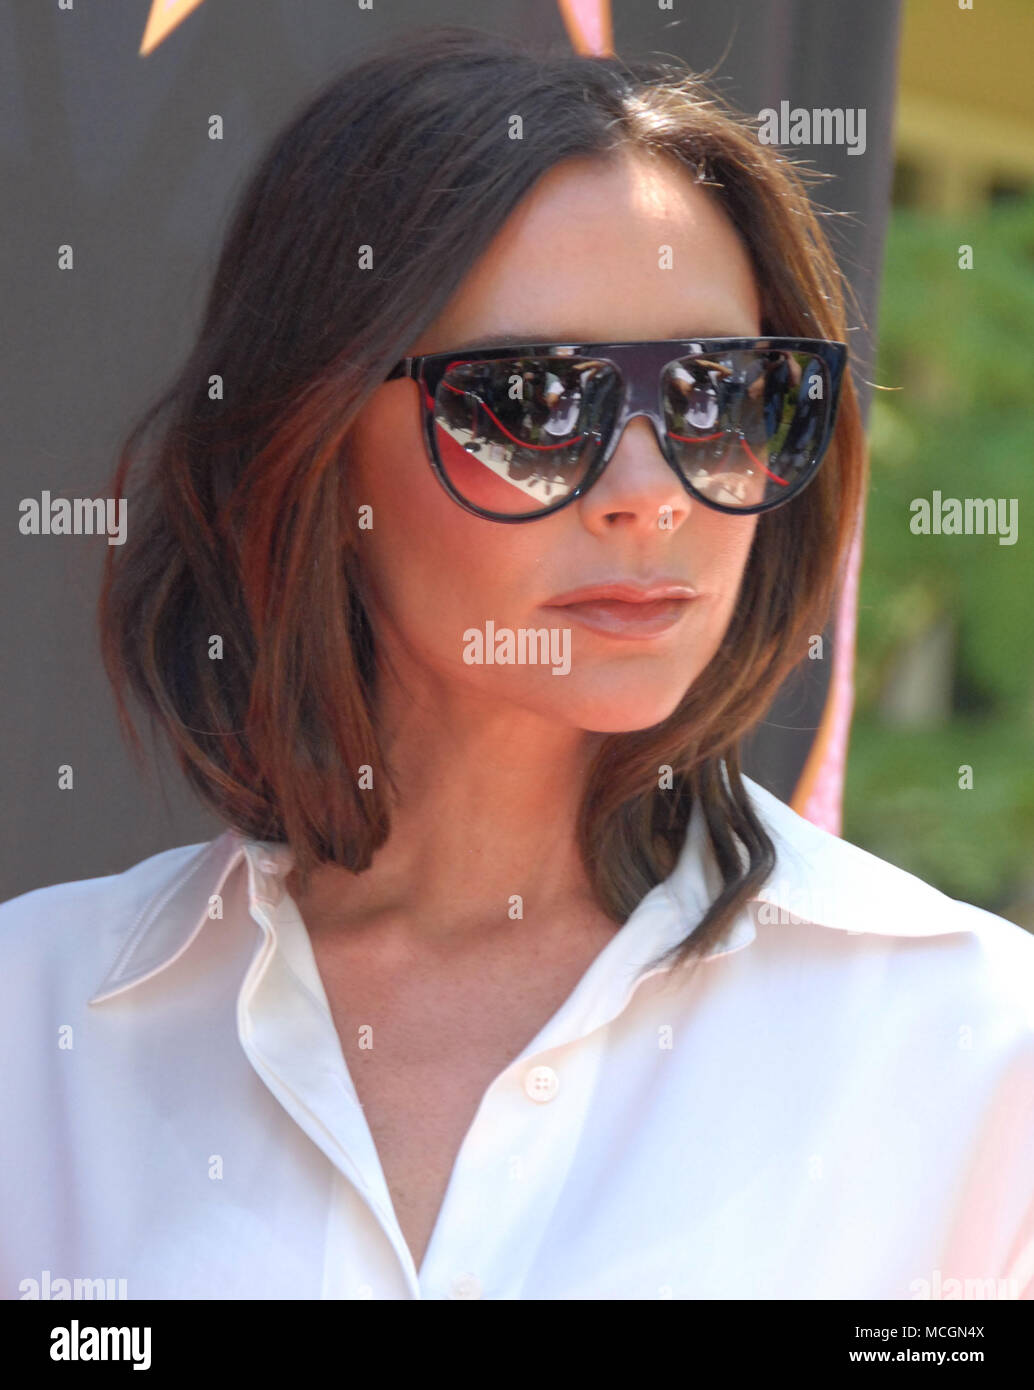 BEVERLY HILLS, CA - APRIL 16: Victoria Beckham attends post reception luncheon for Eva Longoria Star on Walk of Fame on April 16, 2018 in Beverly Hills, California. Photo by Barry King/Alamy Live News Stock Photo